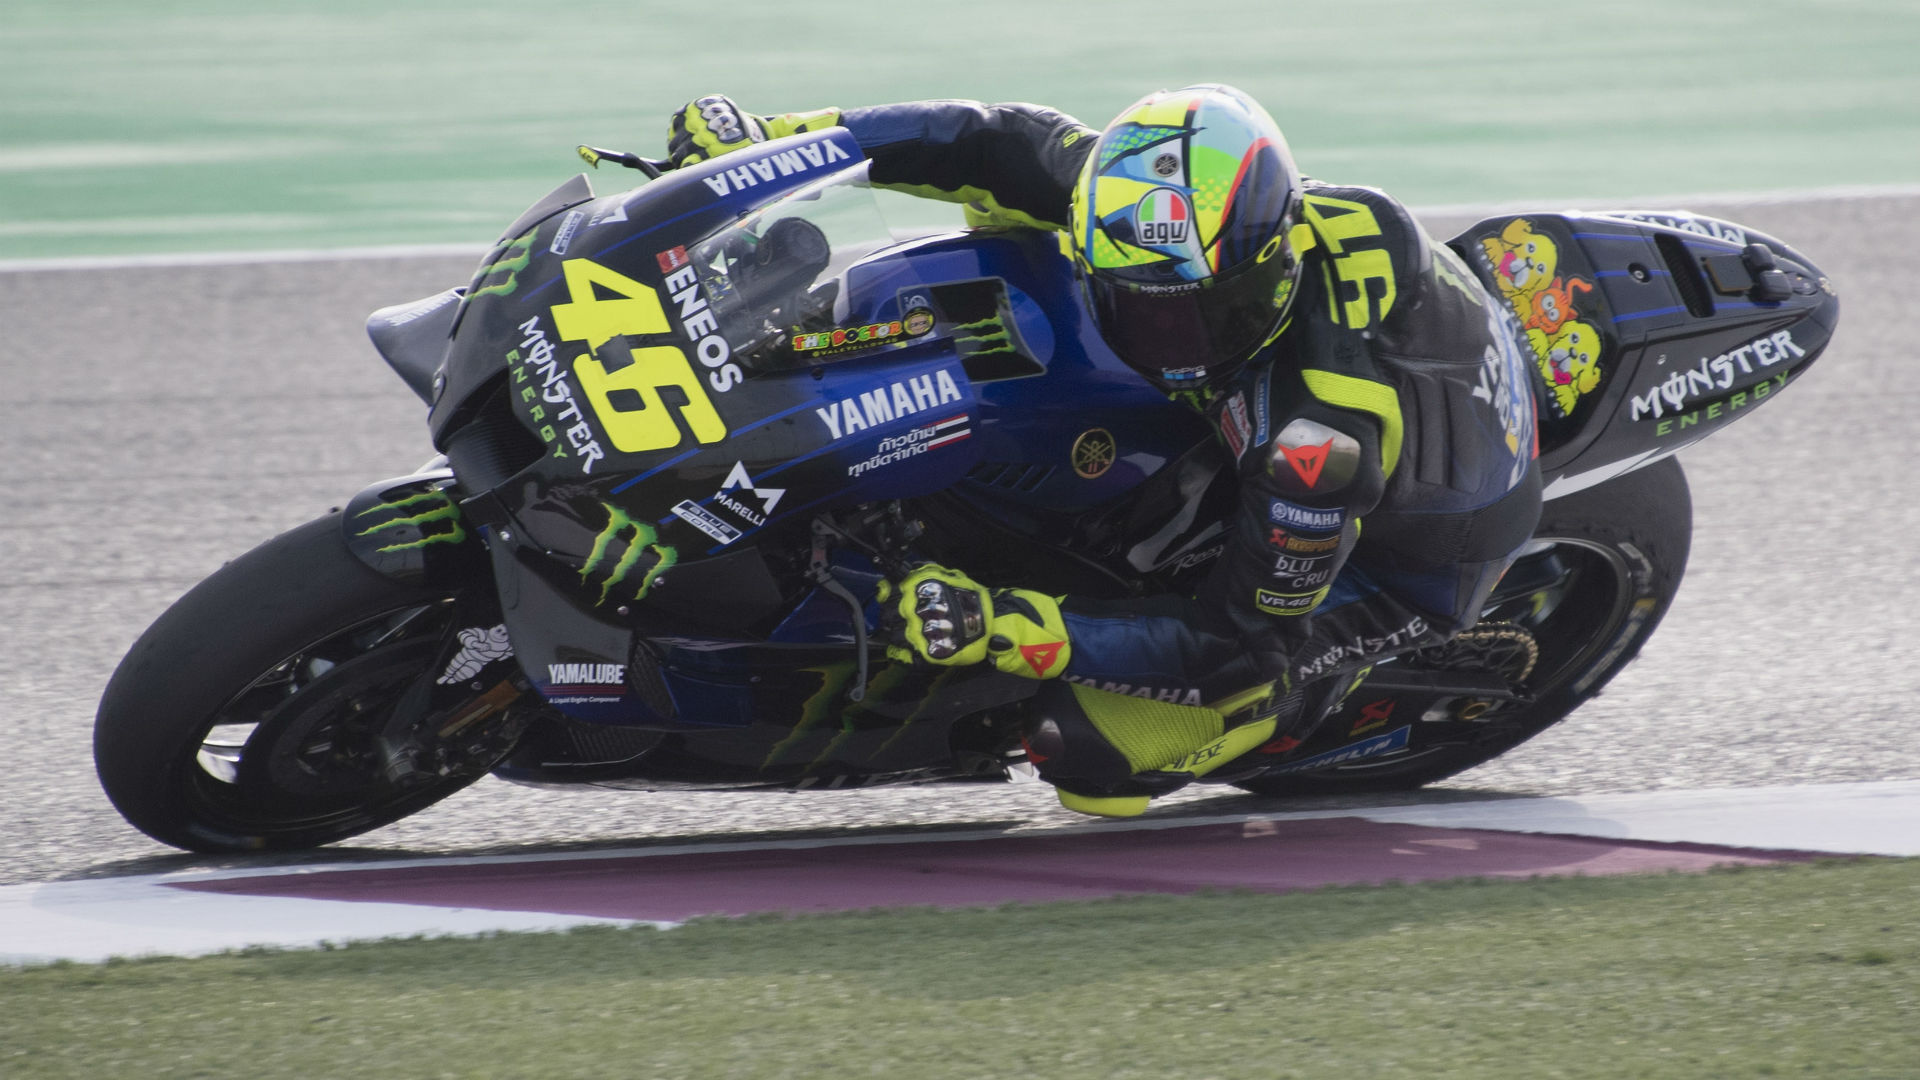 MotoGP legend Valentino Rossi has friends in areas of Italy that have been devastated by the coronavirus.